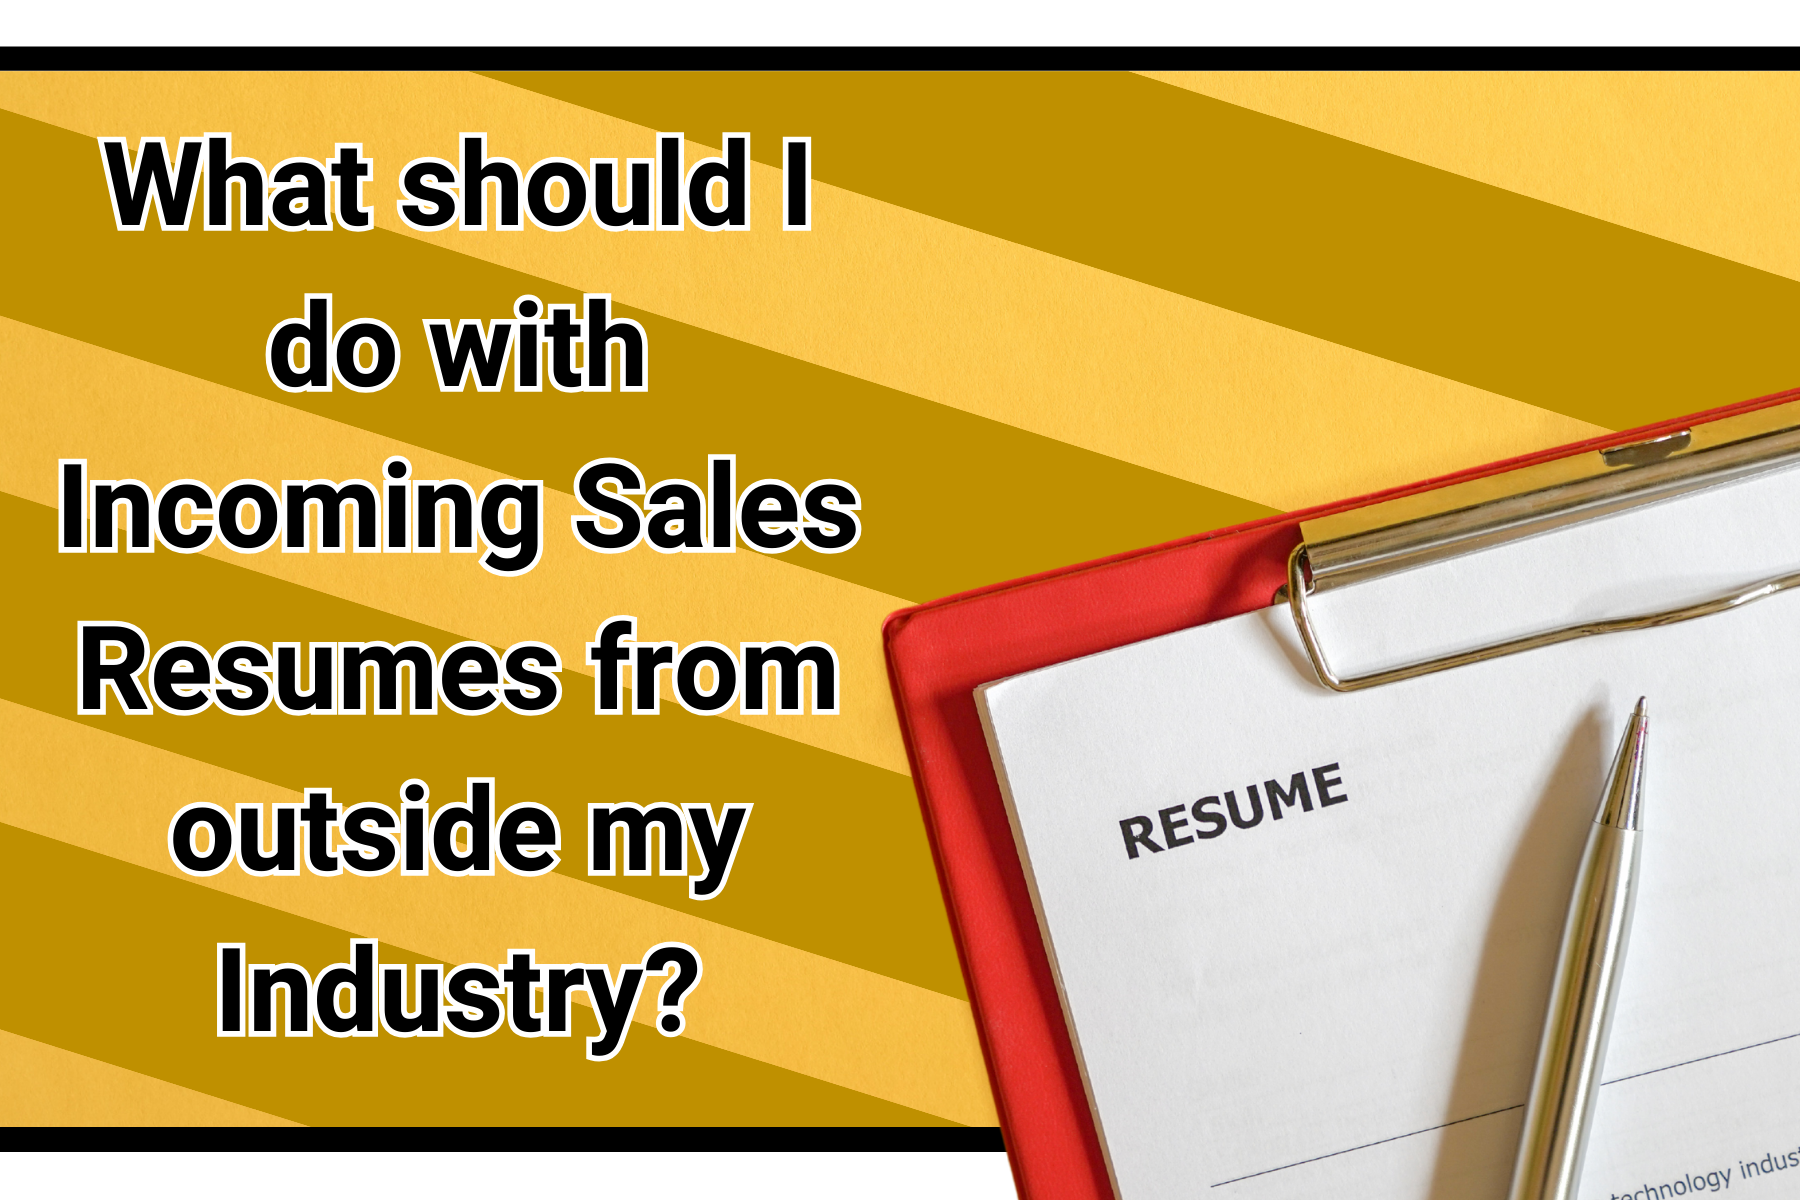 What should I do with incoming Sales Resumes from outside my Industry?